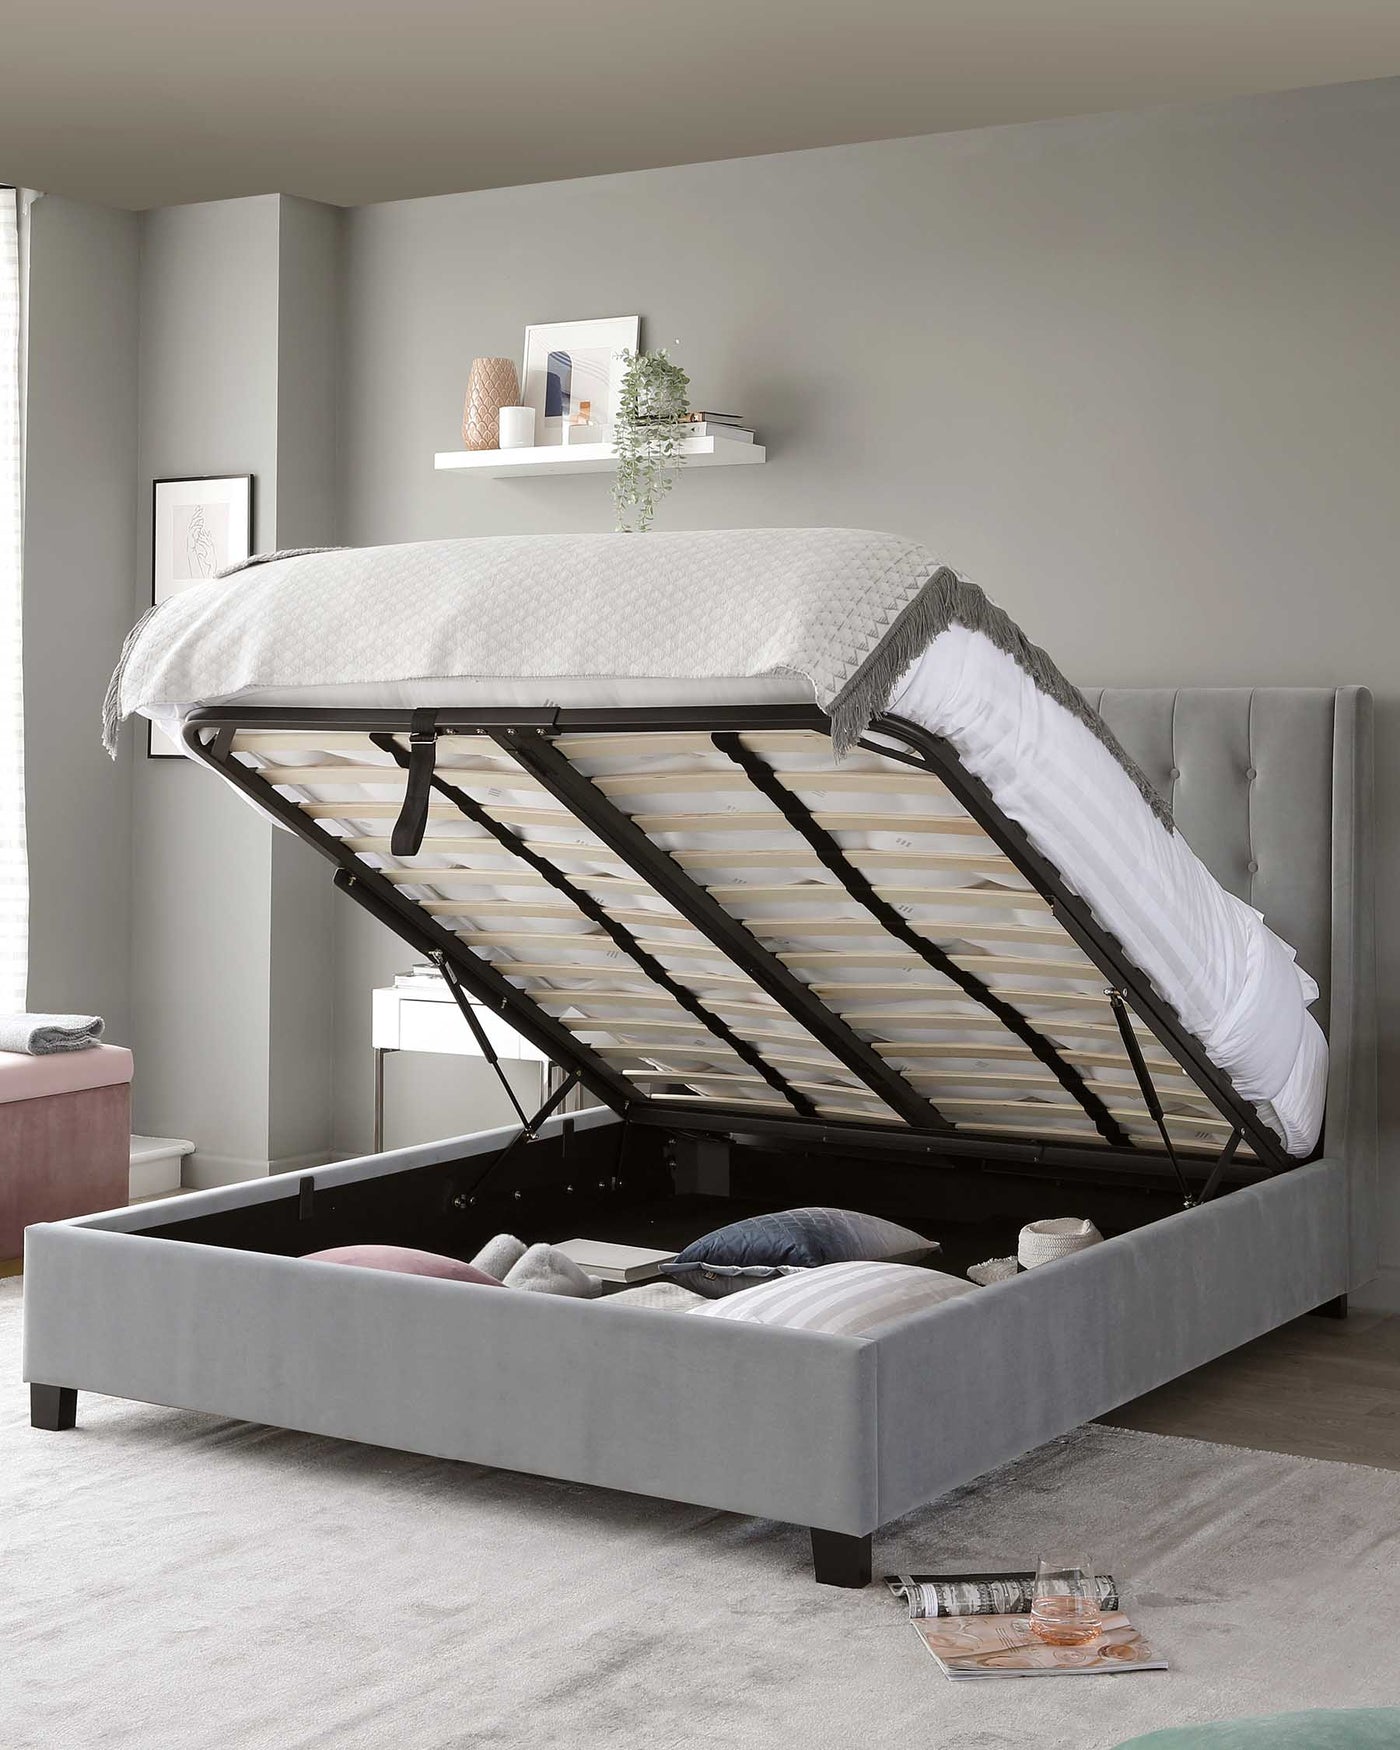 A contemporary grey upholstered storage bed with a button-tufted headboard and an easy-lift hydraulic system revealing ample under-mattress storage.